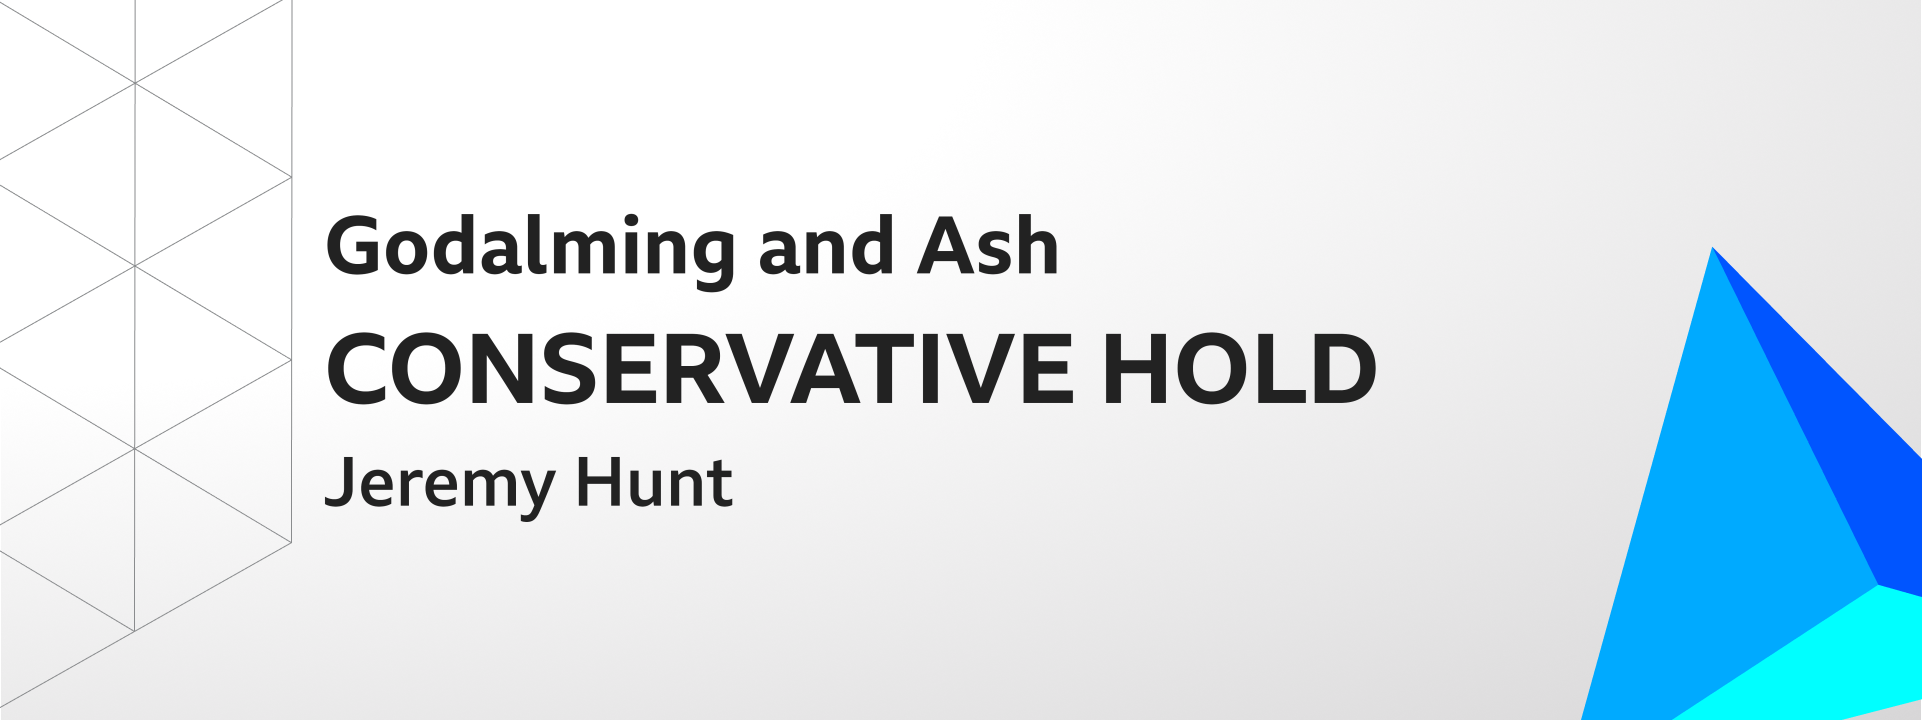 Graphic showing Conservatives hold Godalming and Ash. The winning candidate was Jeremy Hunt.